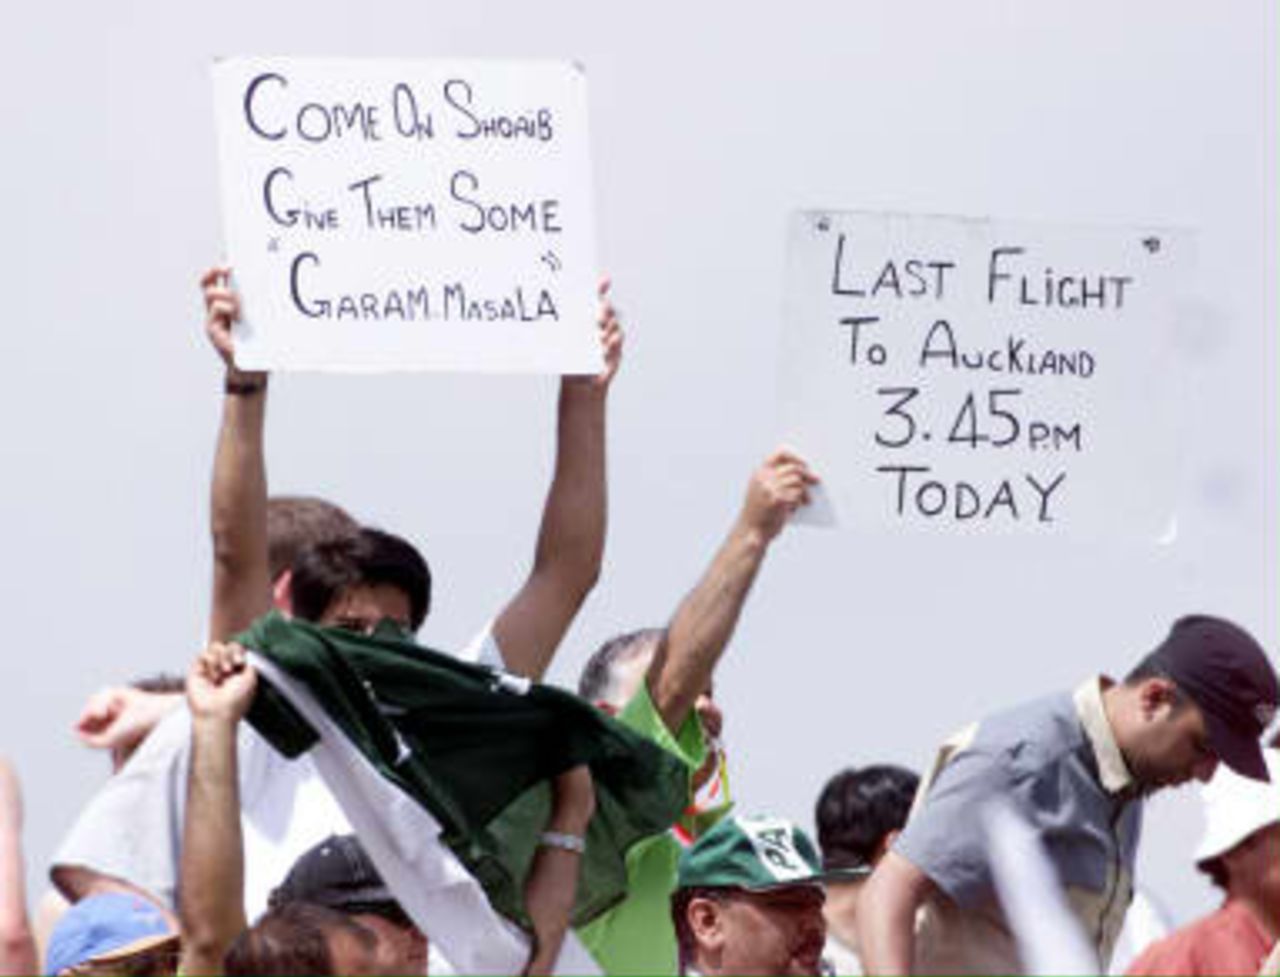 Pakistani fans offer messages to the teams during their semi-final match against New Zealand in the Cricket World Cup at Old Trafford, Manchester, 16 June 1999.